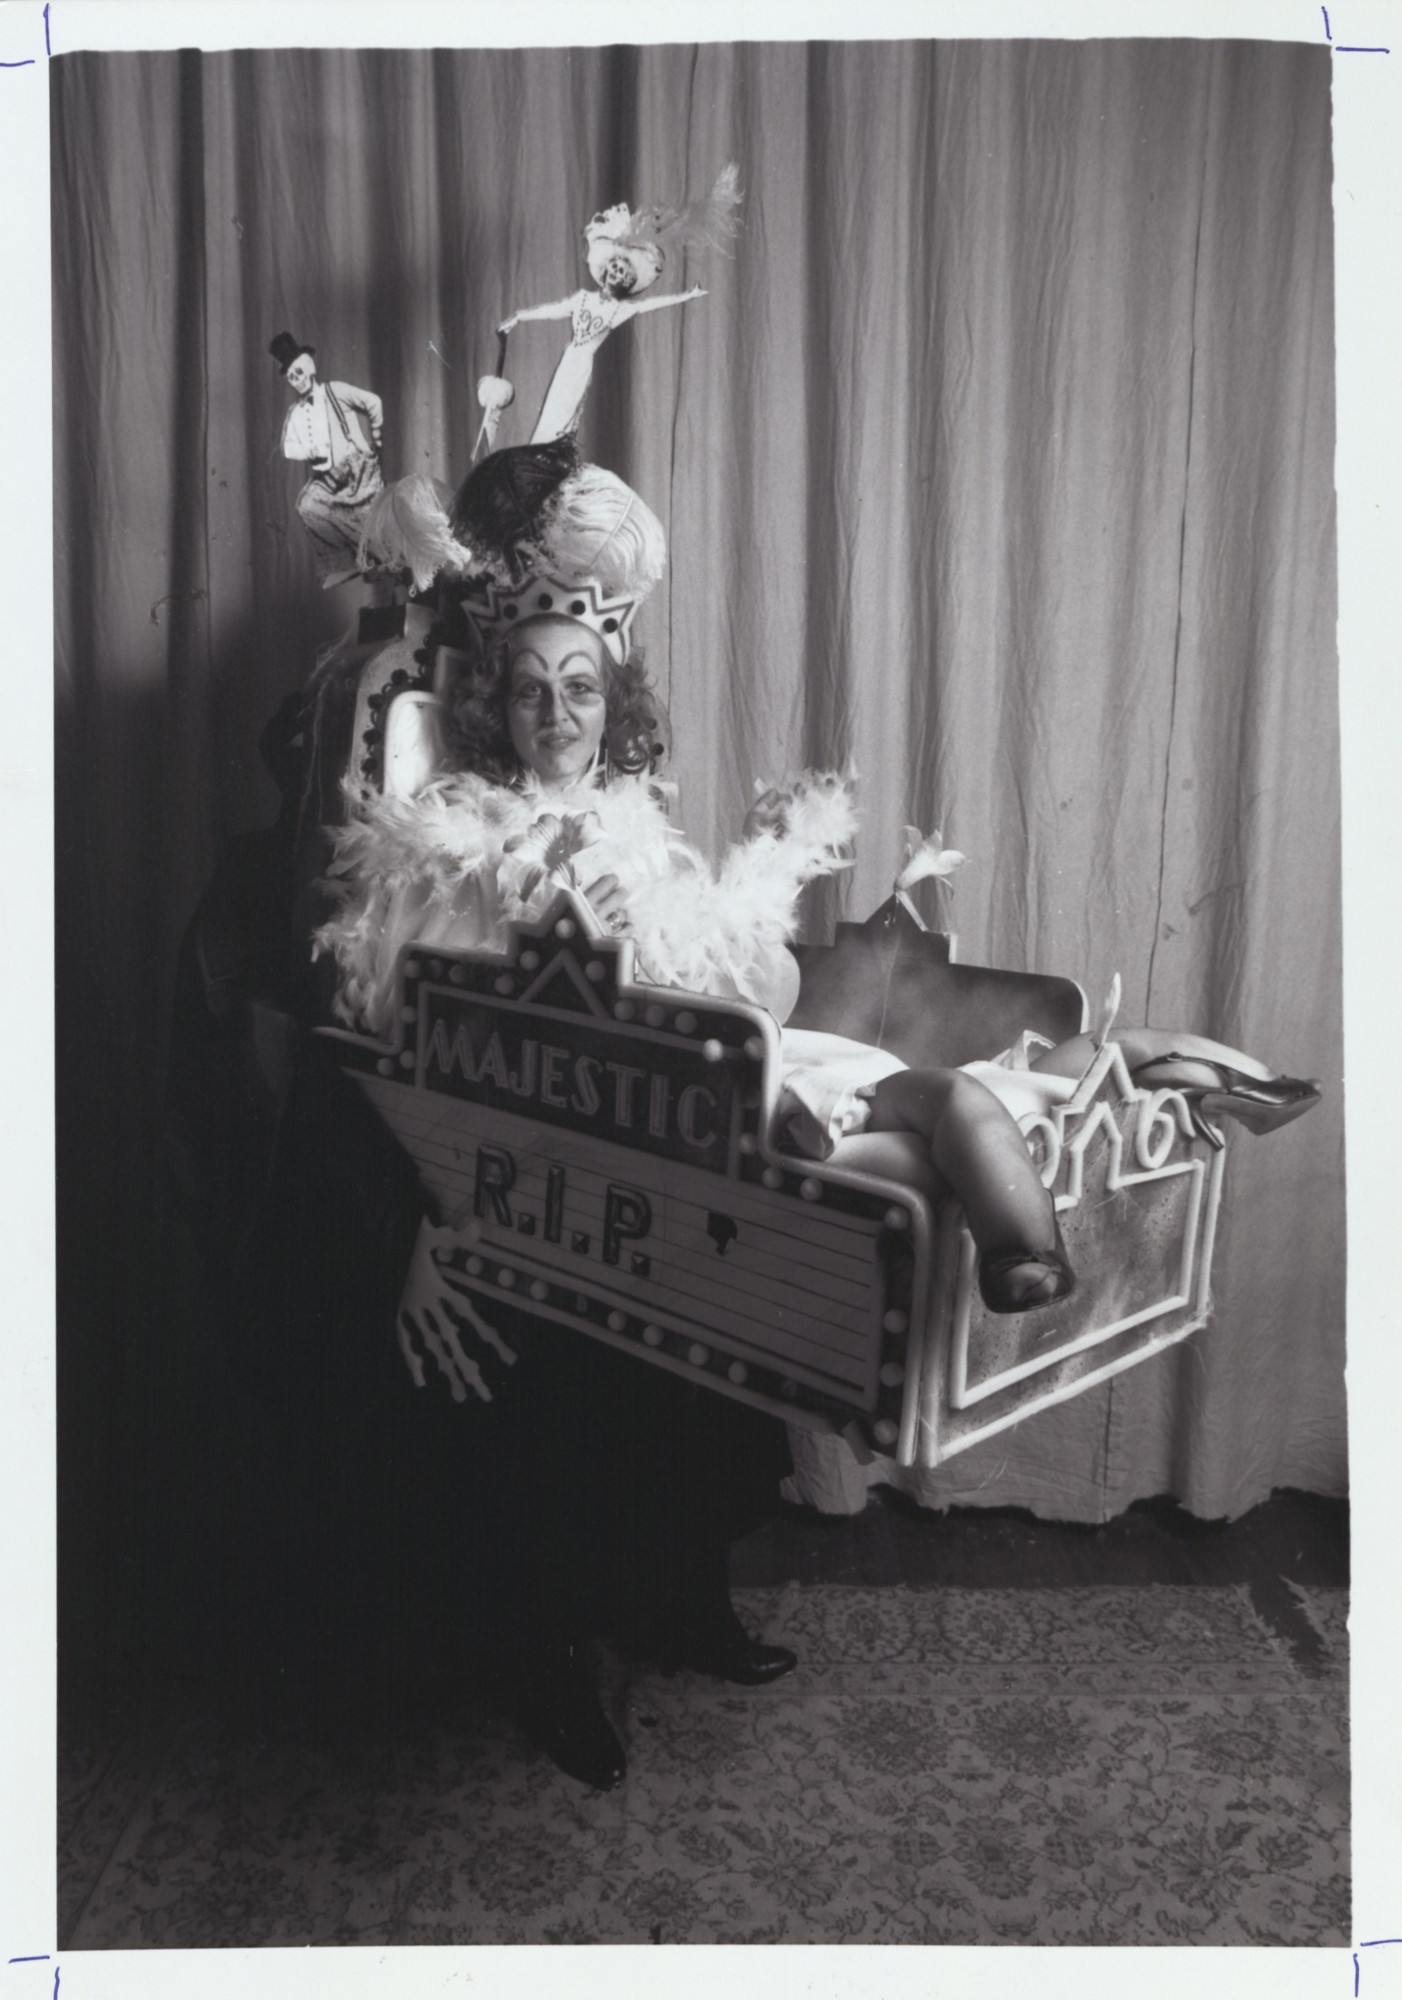 Gretchen Schoopman as the Empress of the “Song of No Way,” parodying the closure of The Majestic Theatre. This costume was designed by Robert Rehm. 1987. Photography by Reuben Njaa. 